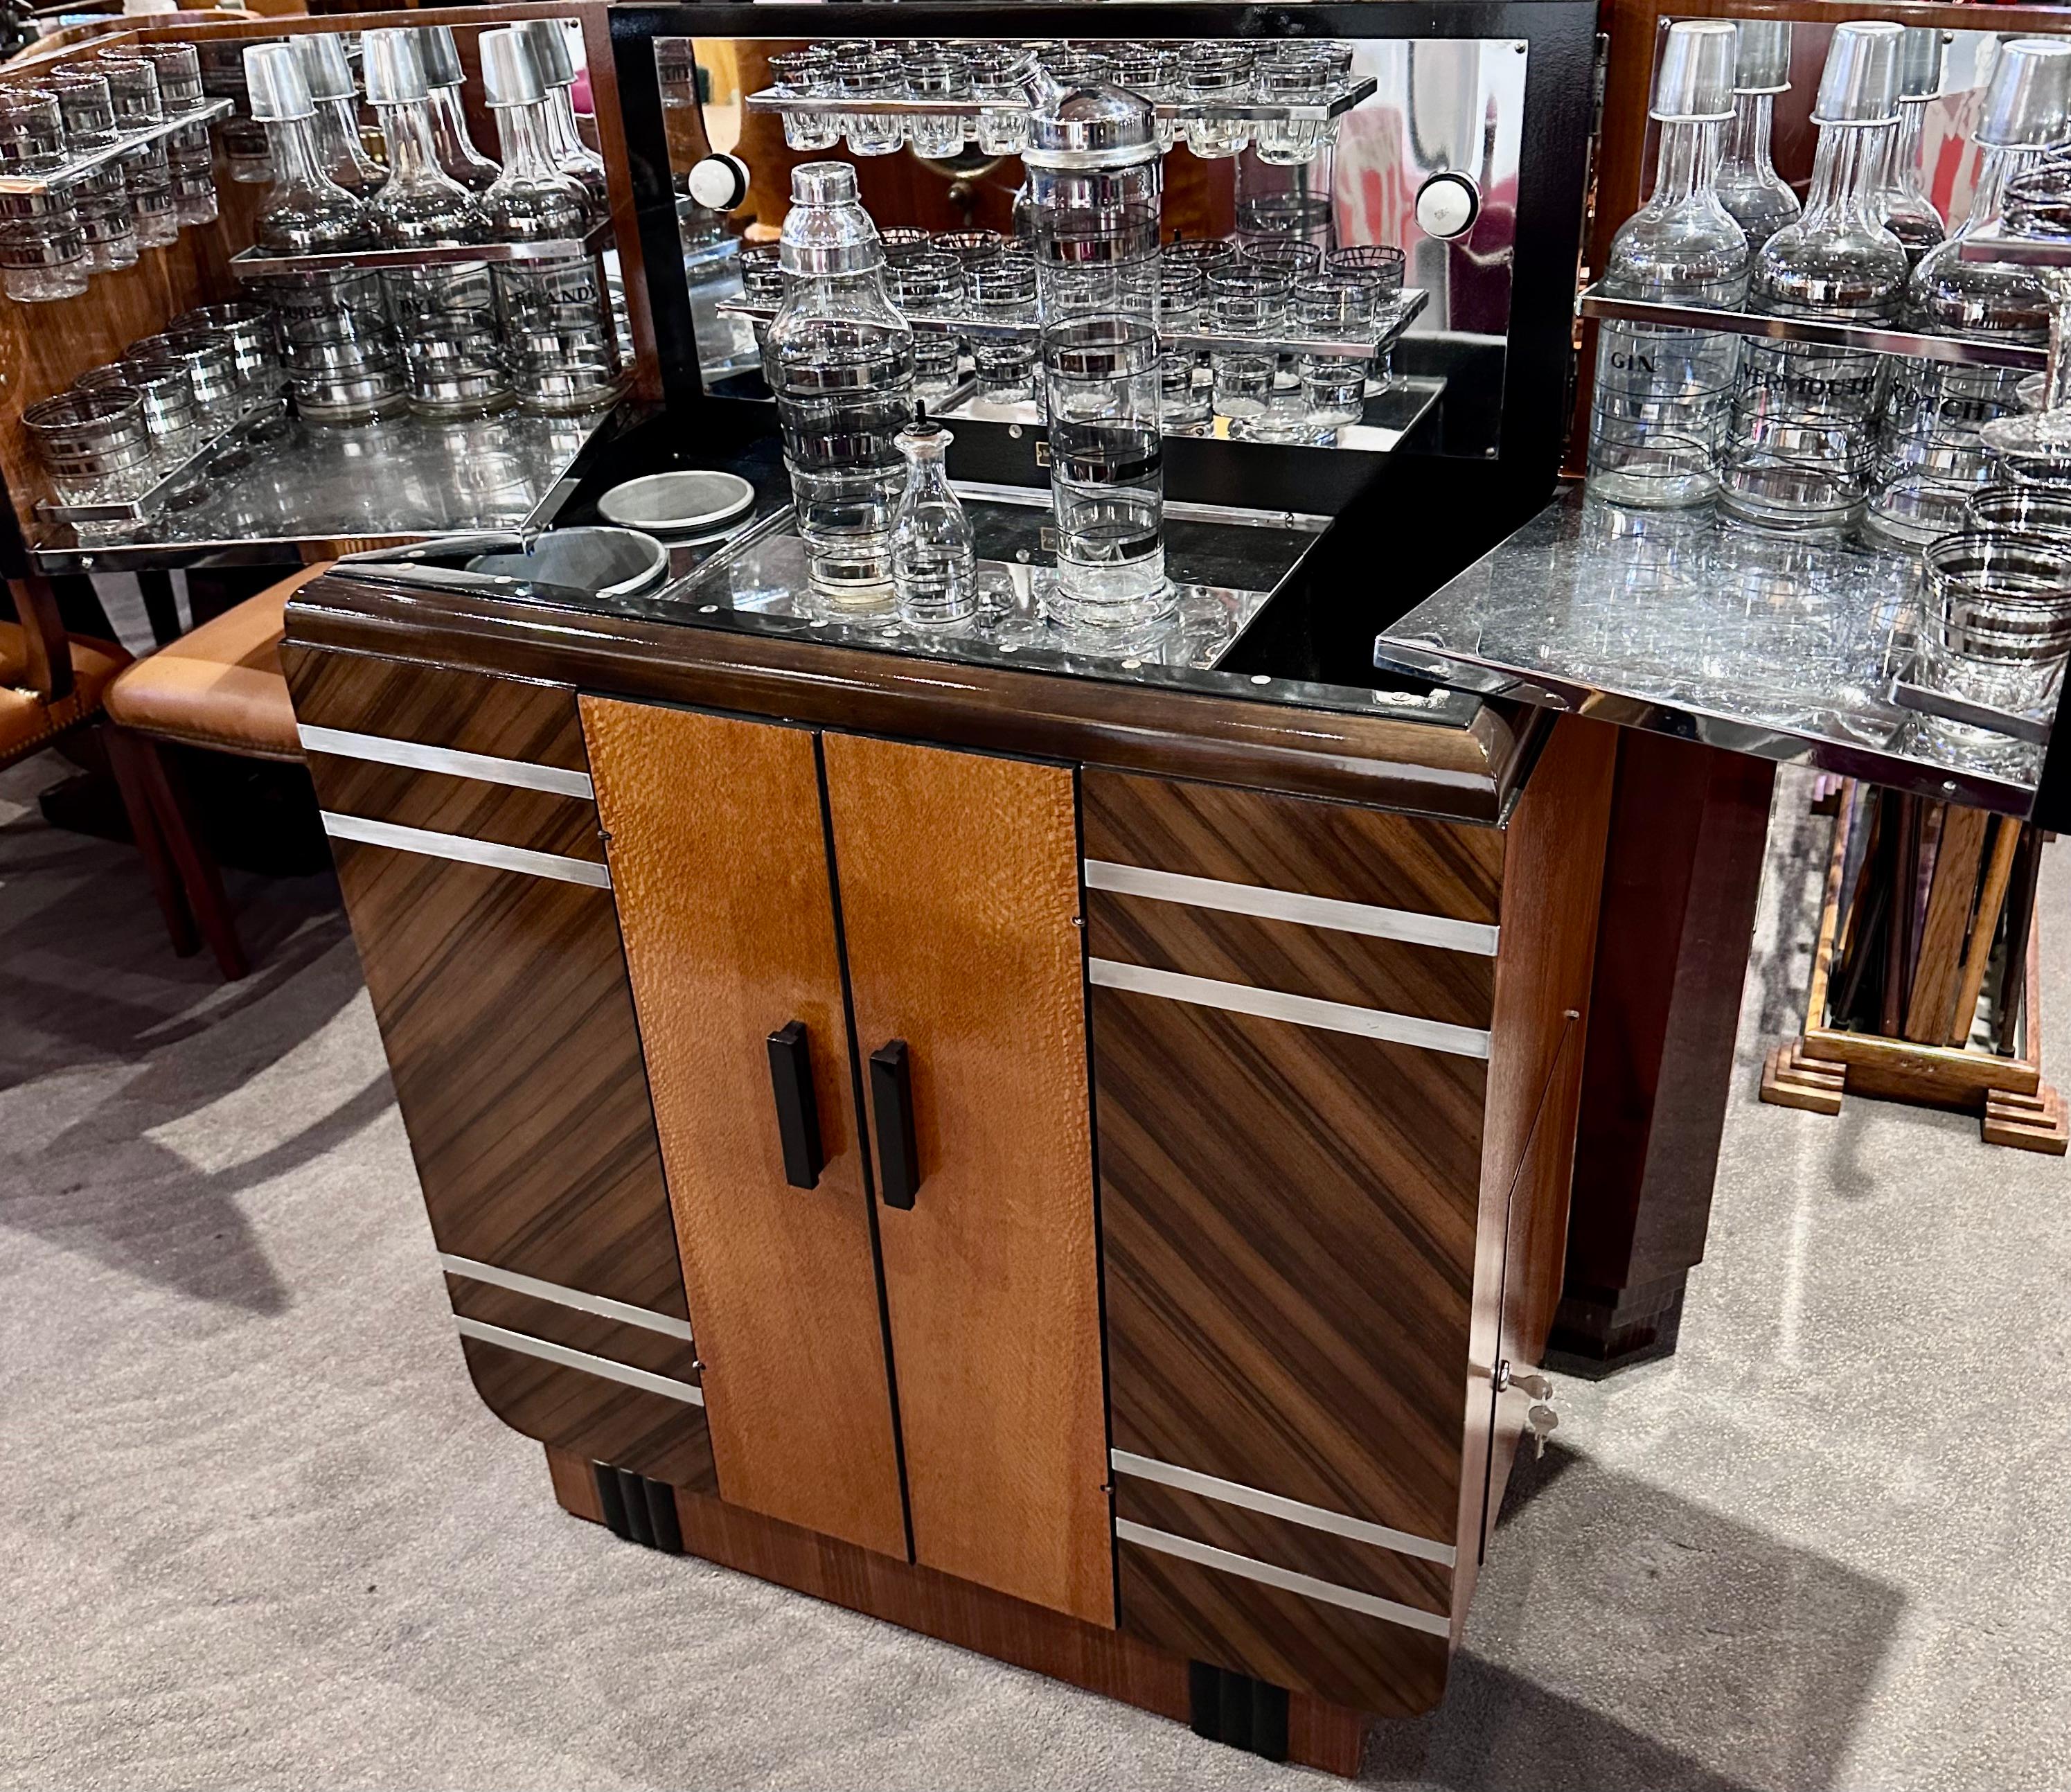 Art Deco Philco RadioBar is a highly sought-after piece cherished by both radio and bar enthusiasts. Originating during the Prohibition Era, a time marked by a fascination with hidden liquor bars, this design peaked in 1936. The RadioBar comes